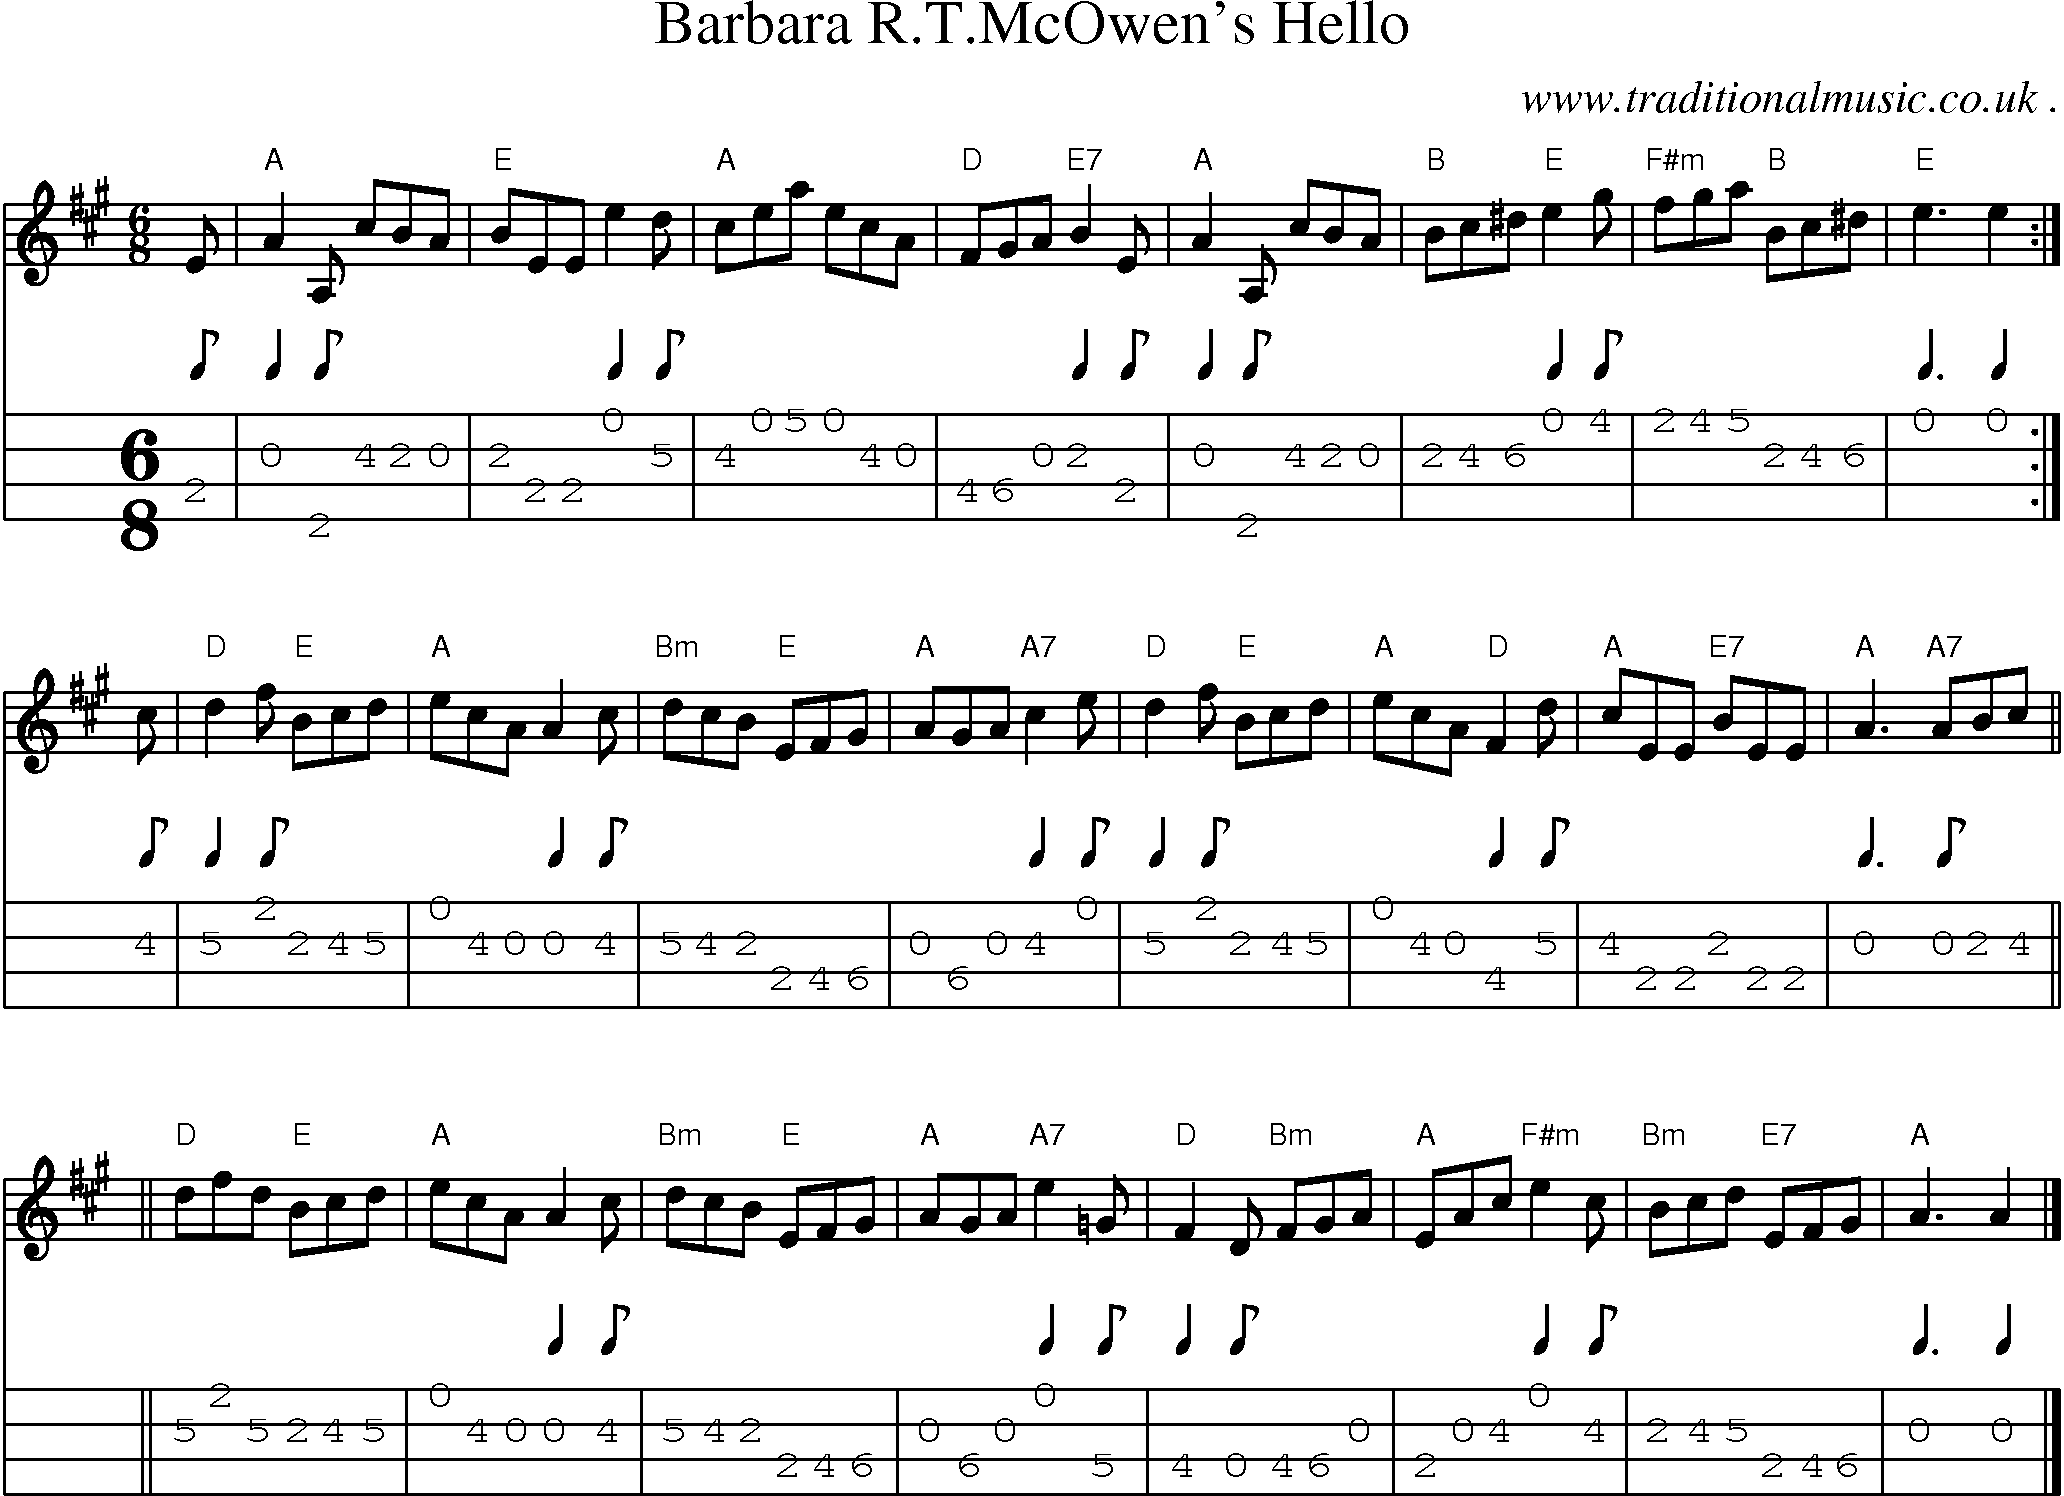 Sheet-music  score, Chords and Mandolin Tabs for Barbara Rtmcowens Hello